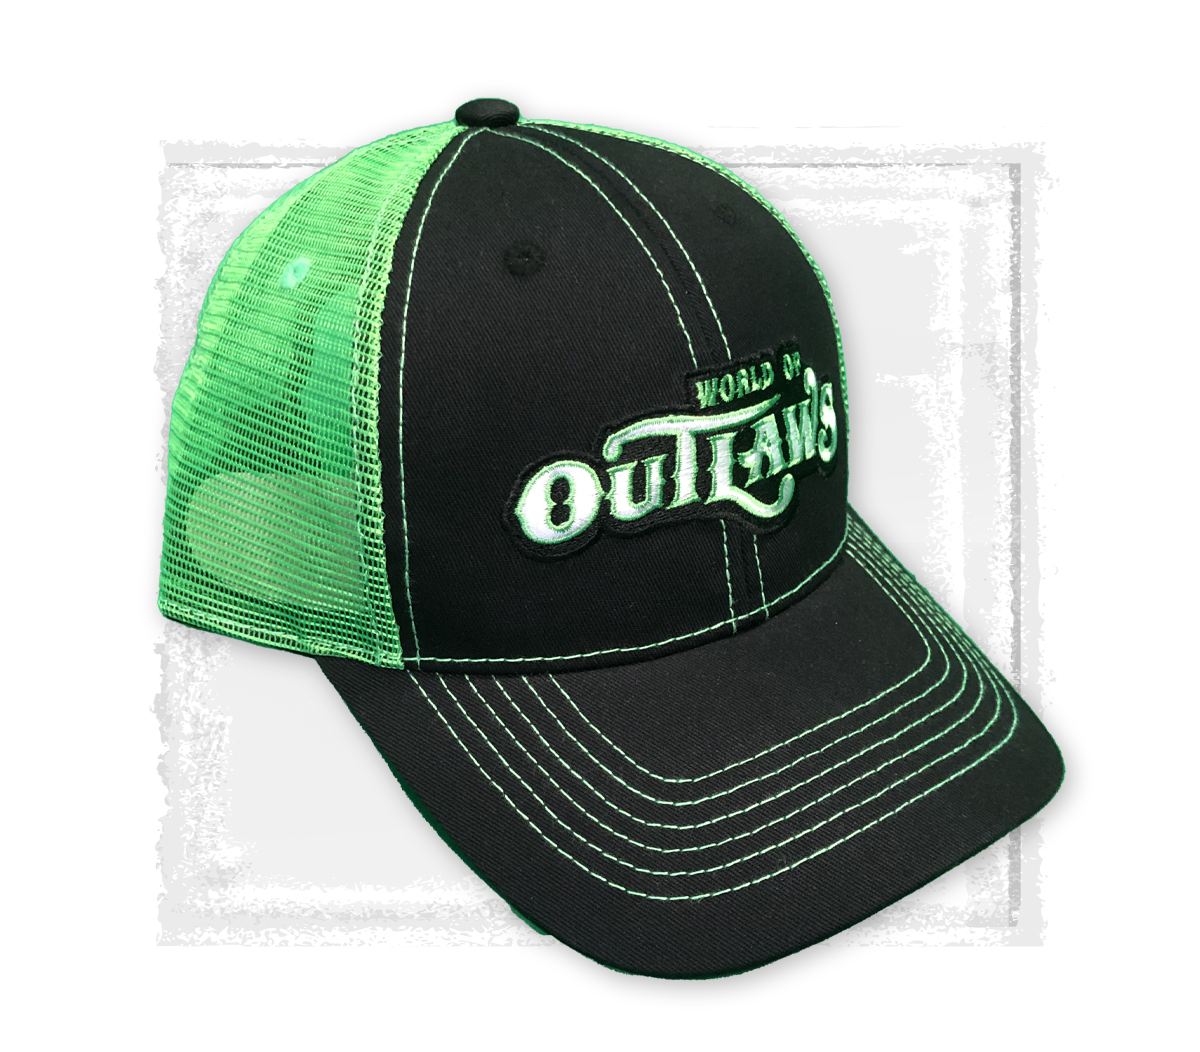 Black and Neon Green Snapback Hat